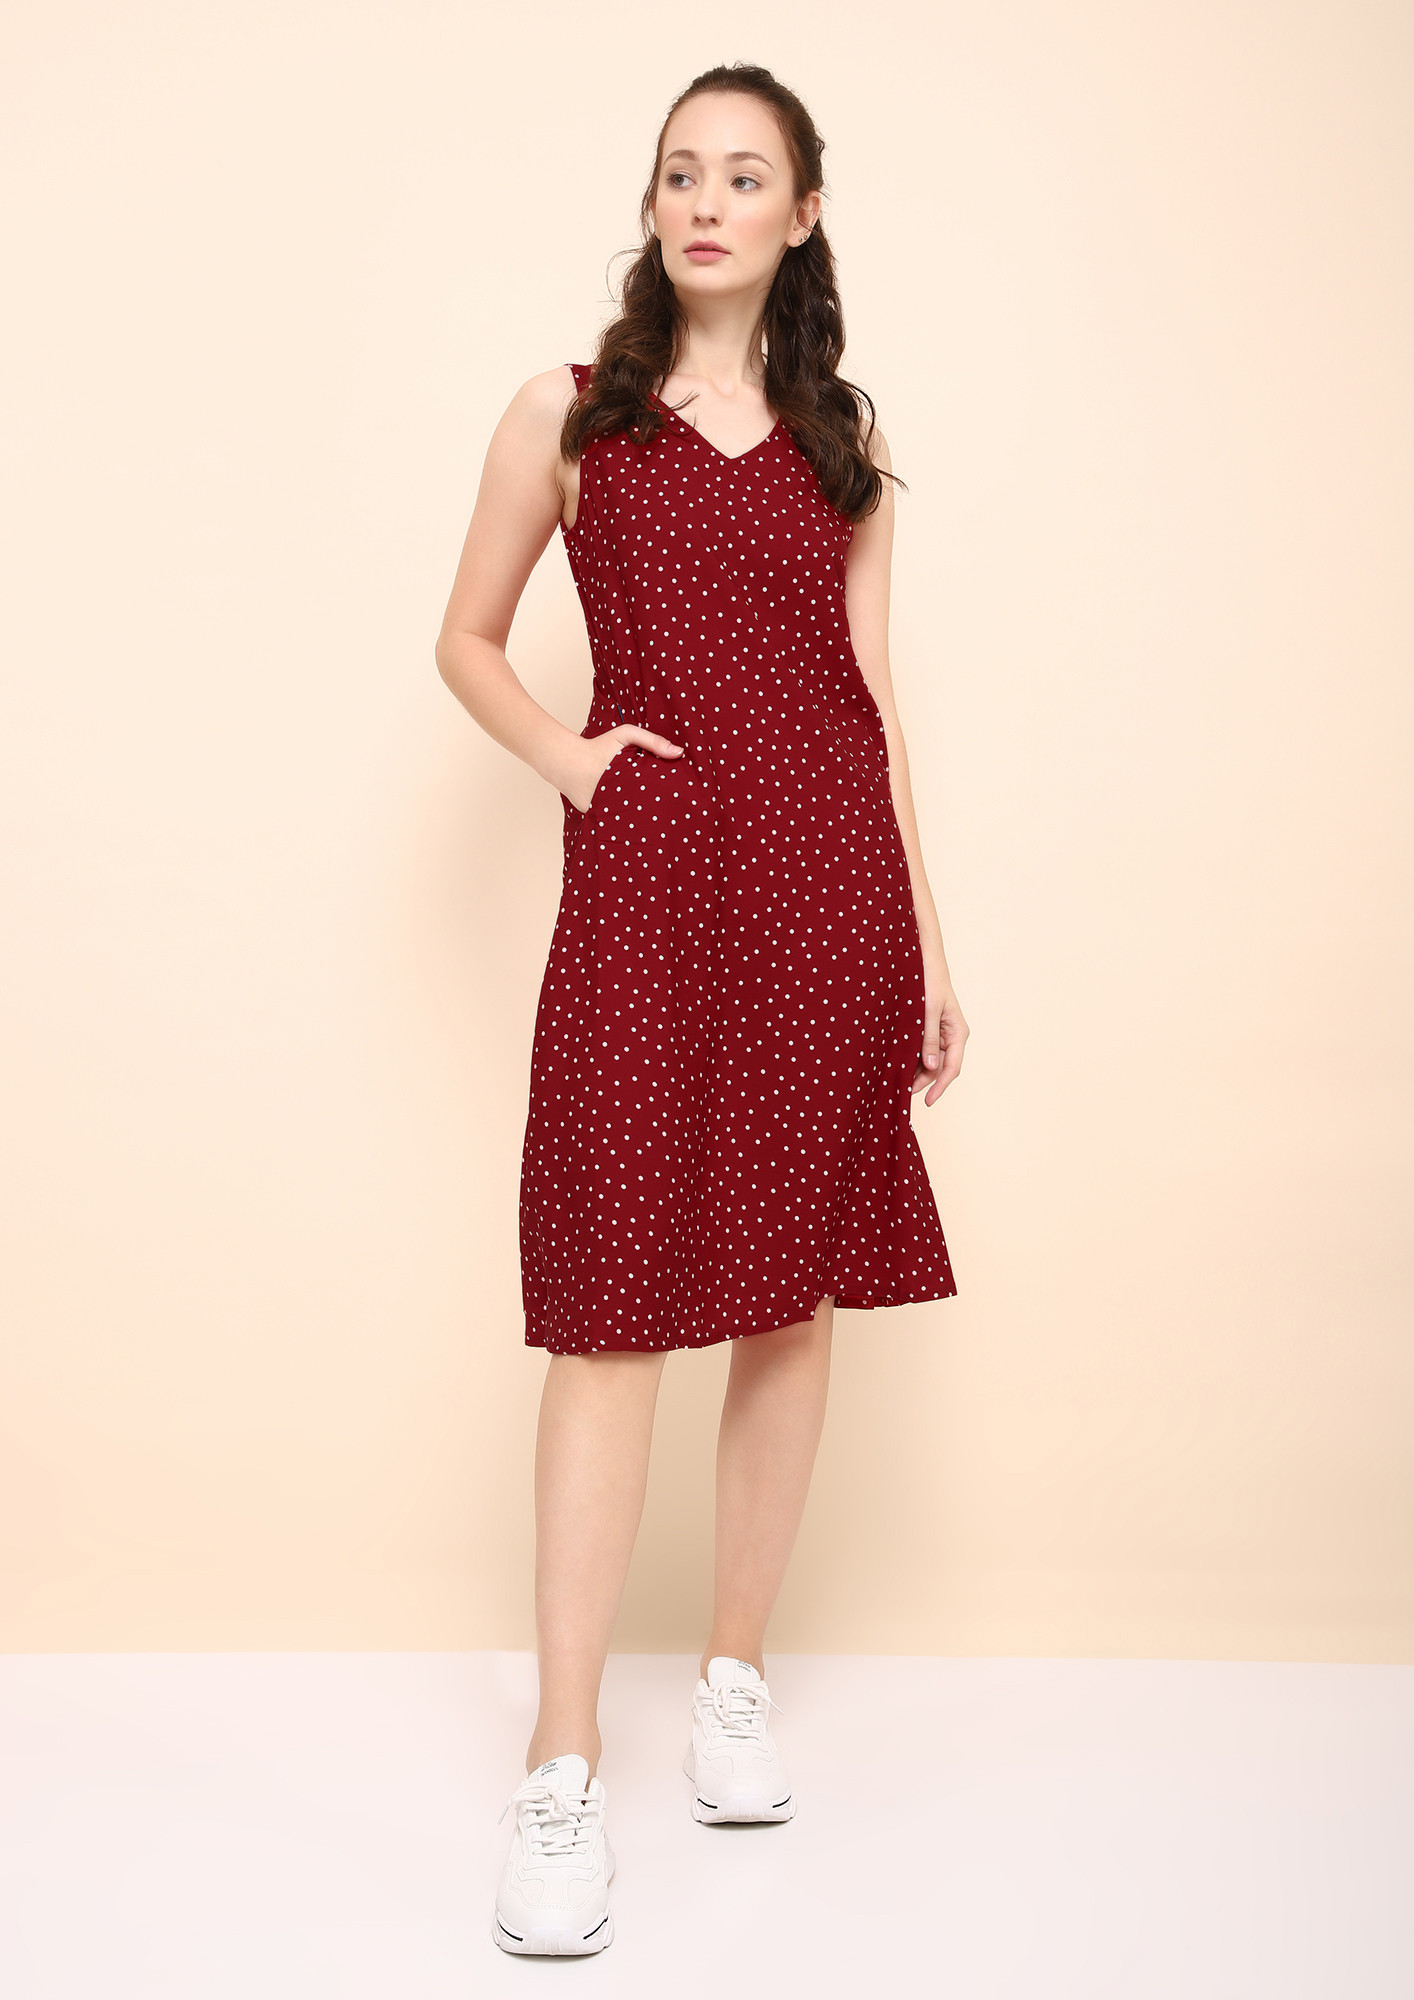 HOT FOR DOTS RED MIDI DRESS